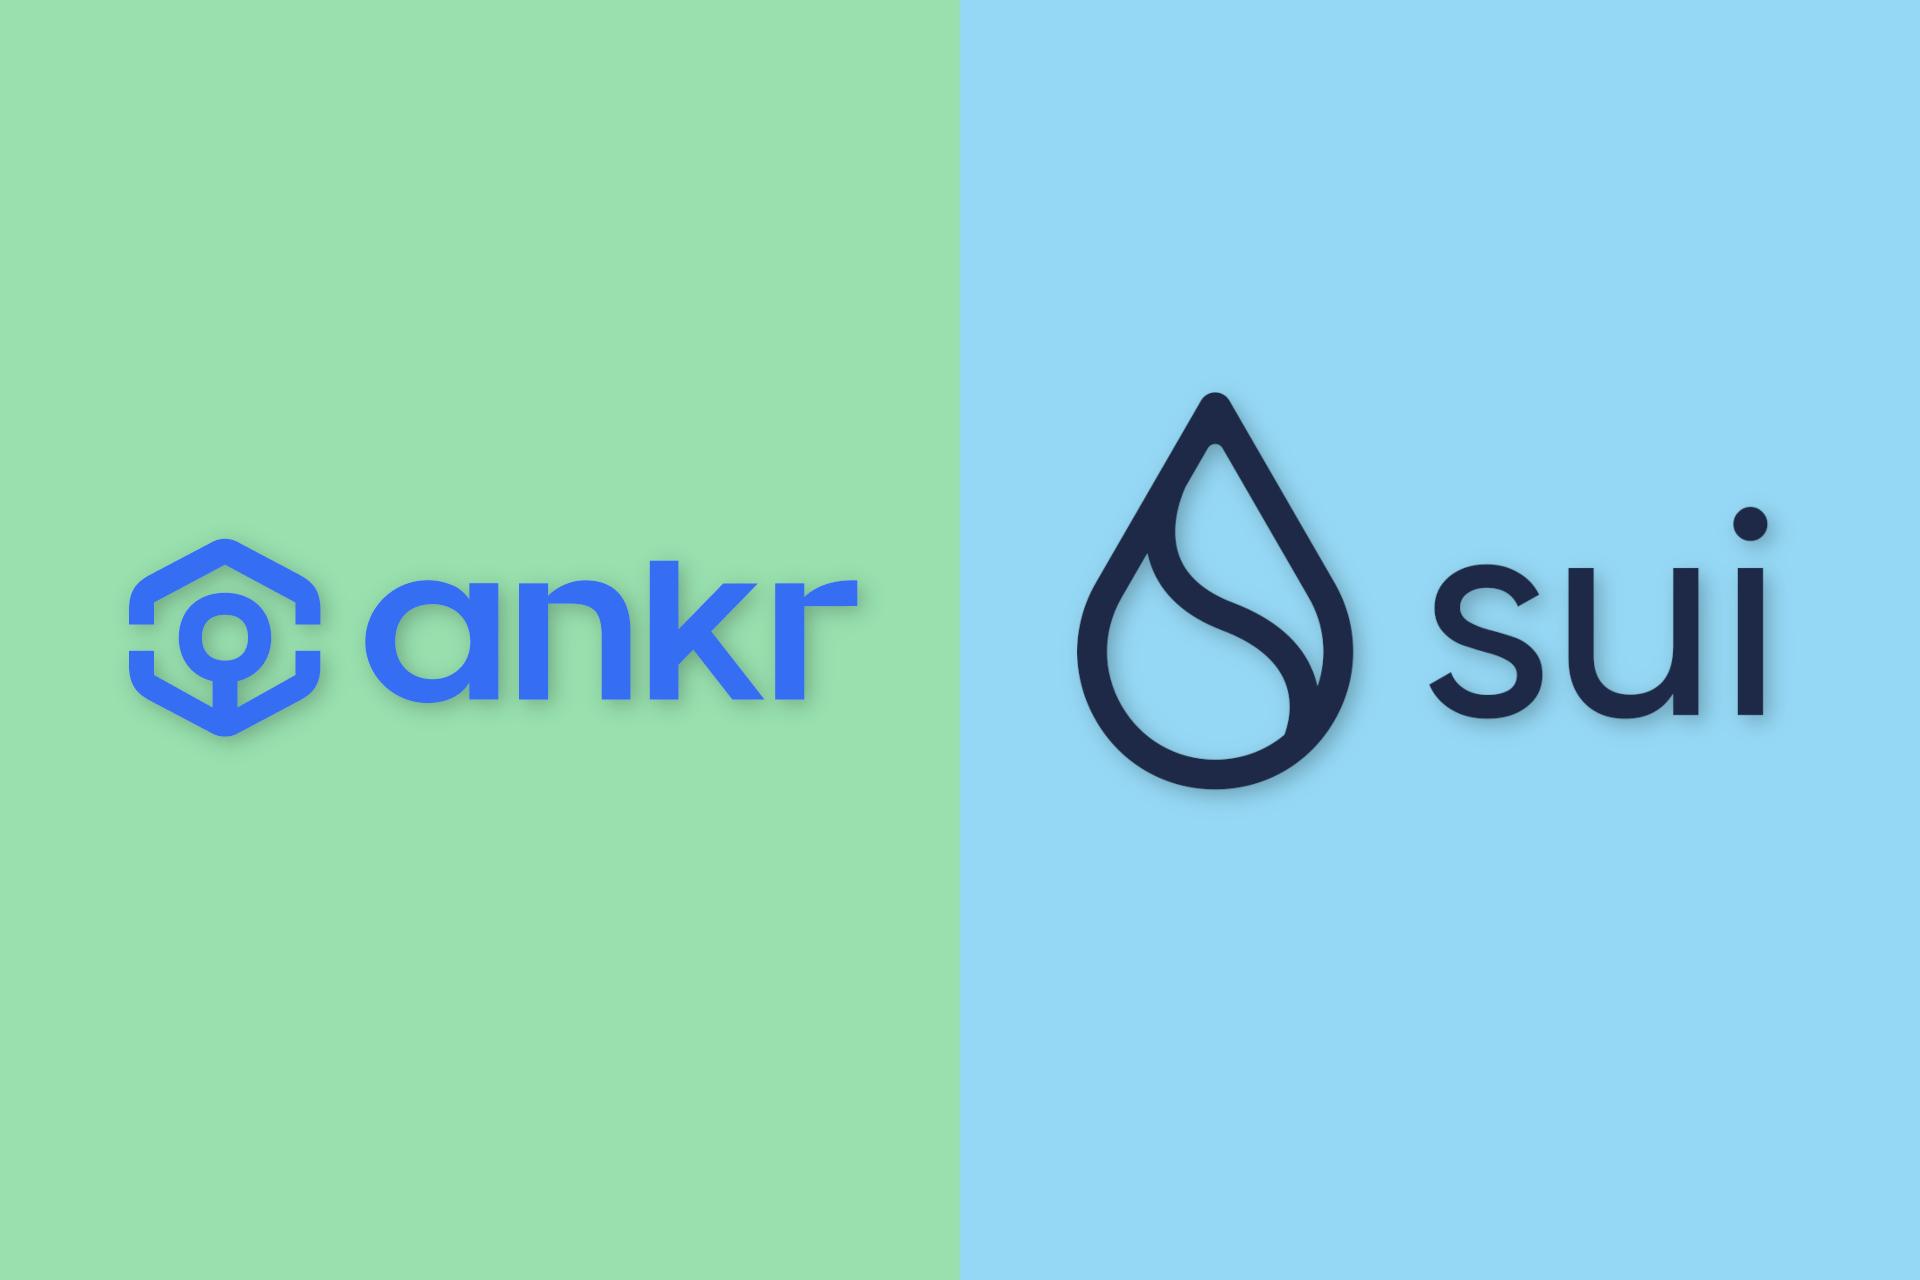 Ankr enters strategis partnership with the Sui blockchain